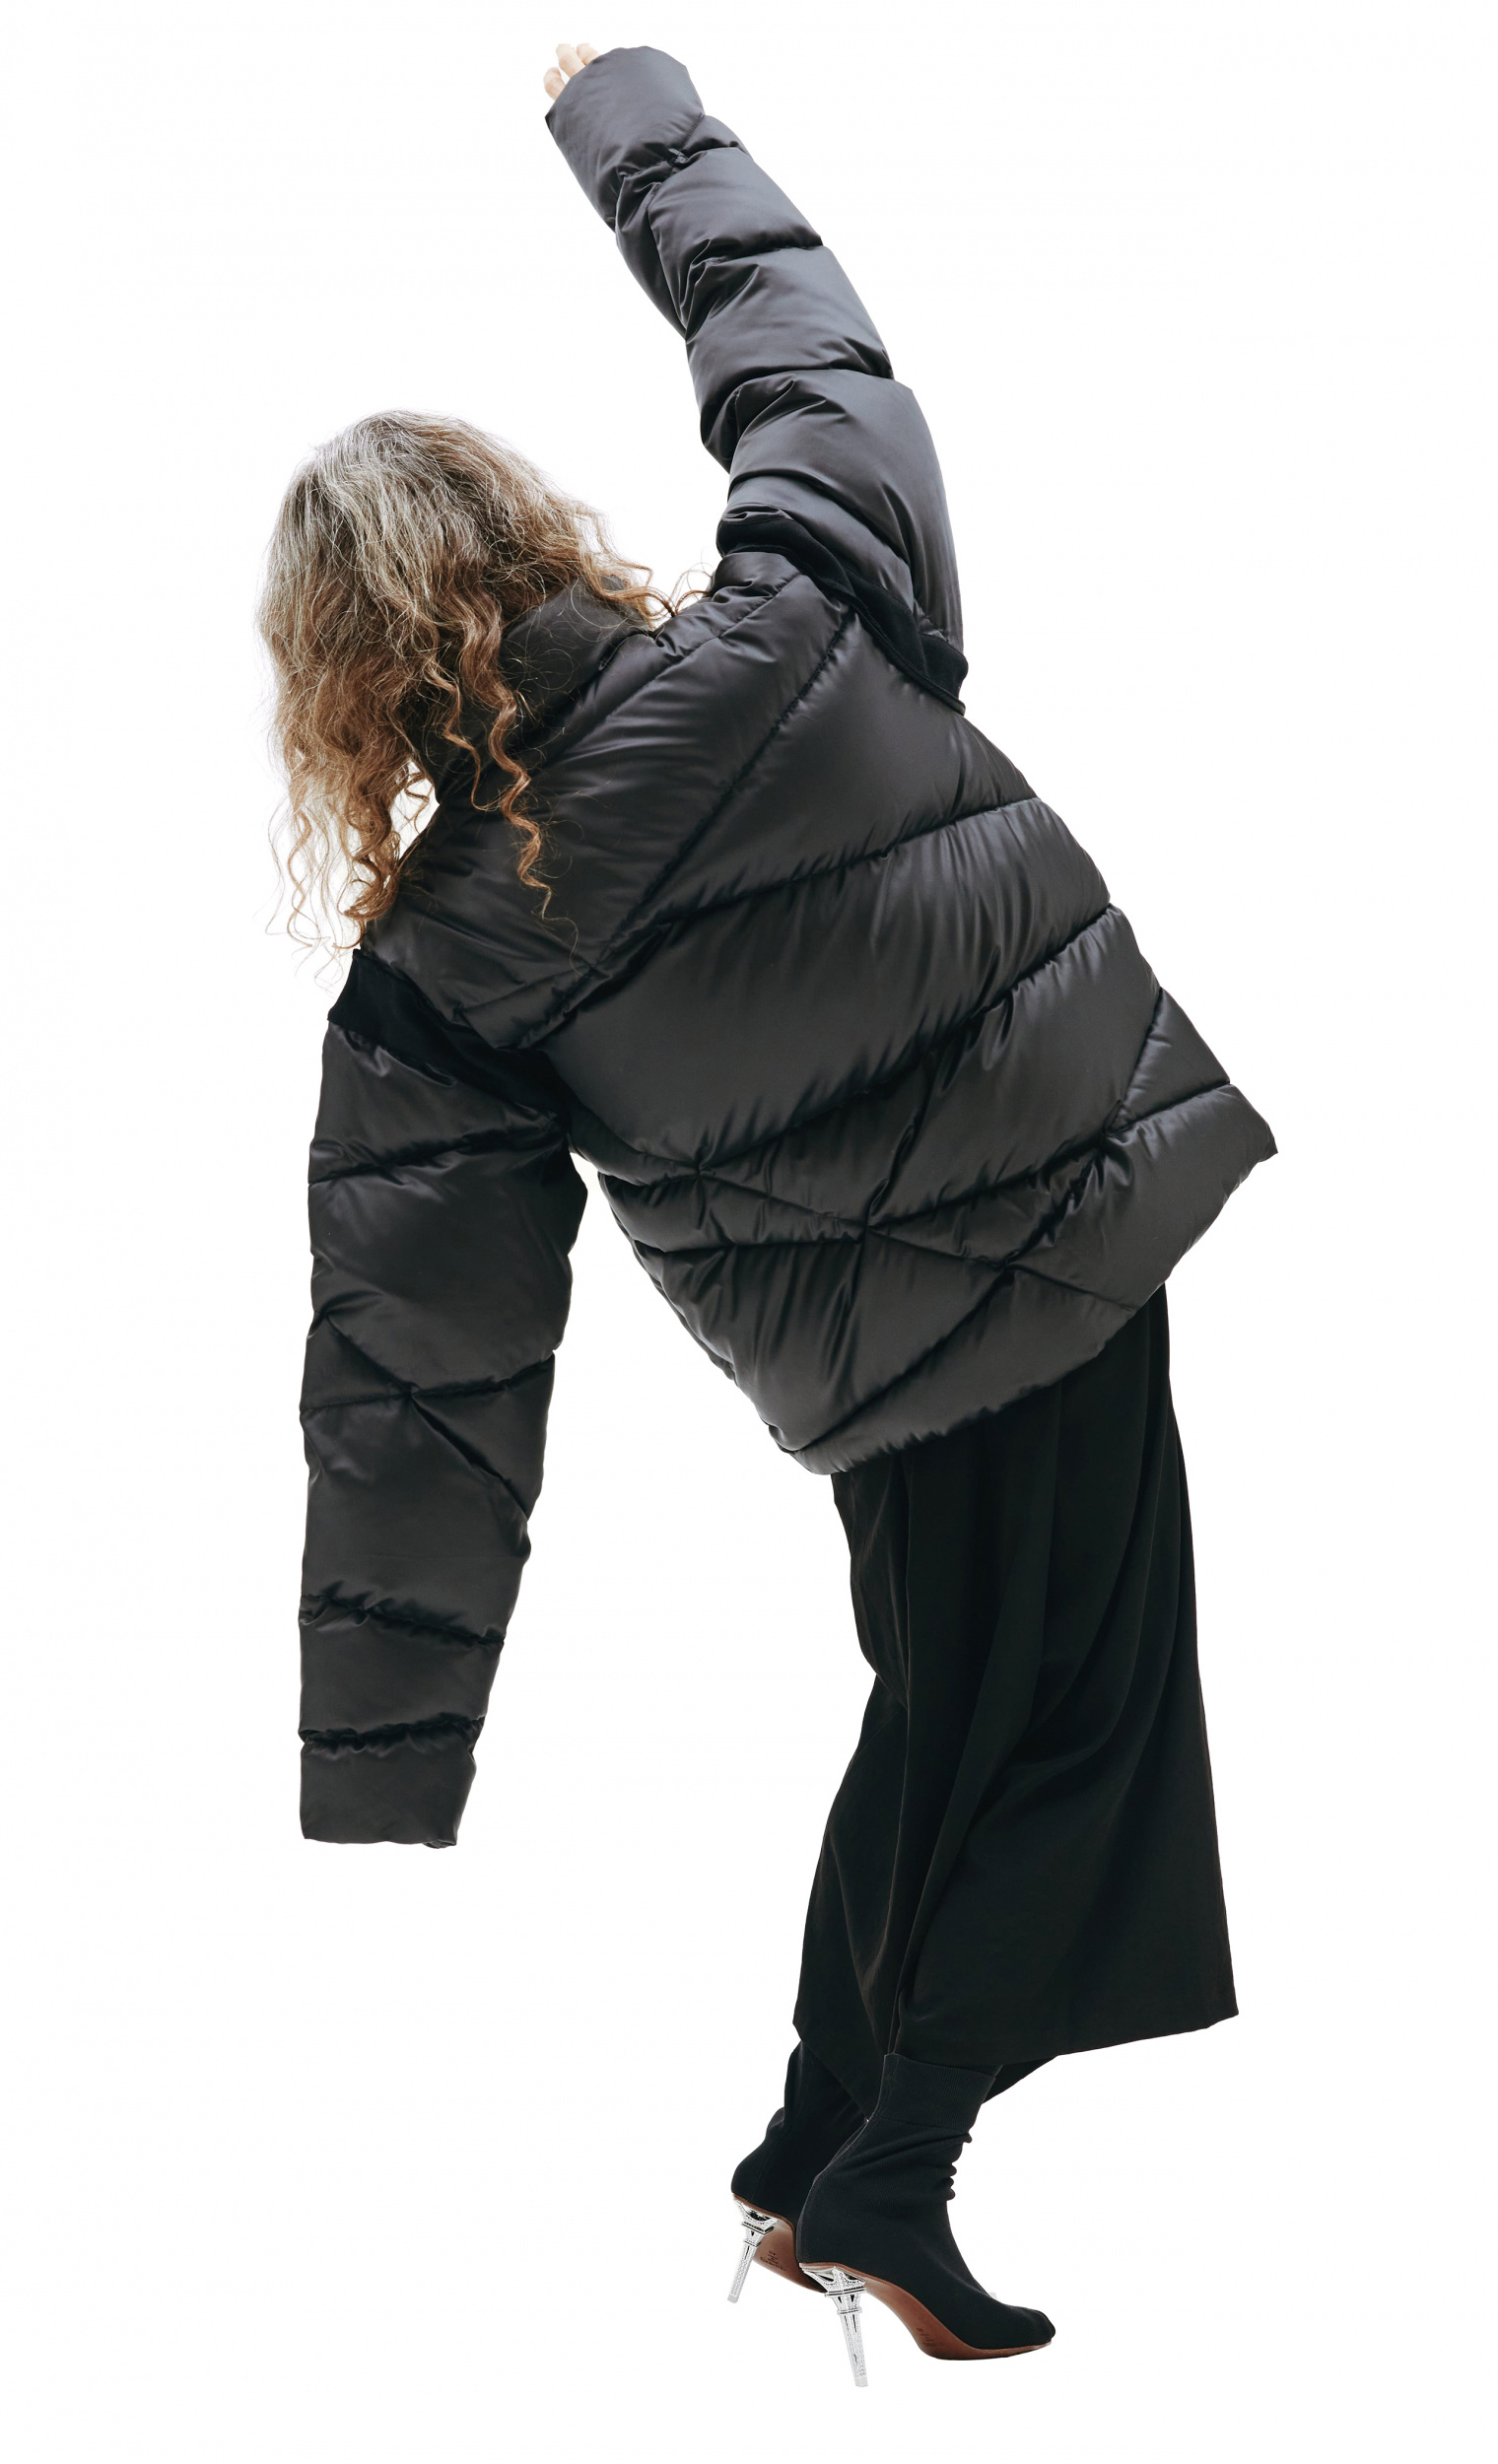 Undercover Asymmetrically quilted down jacket